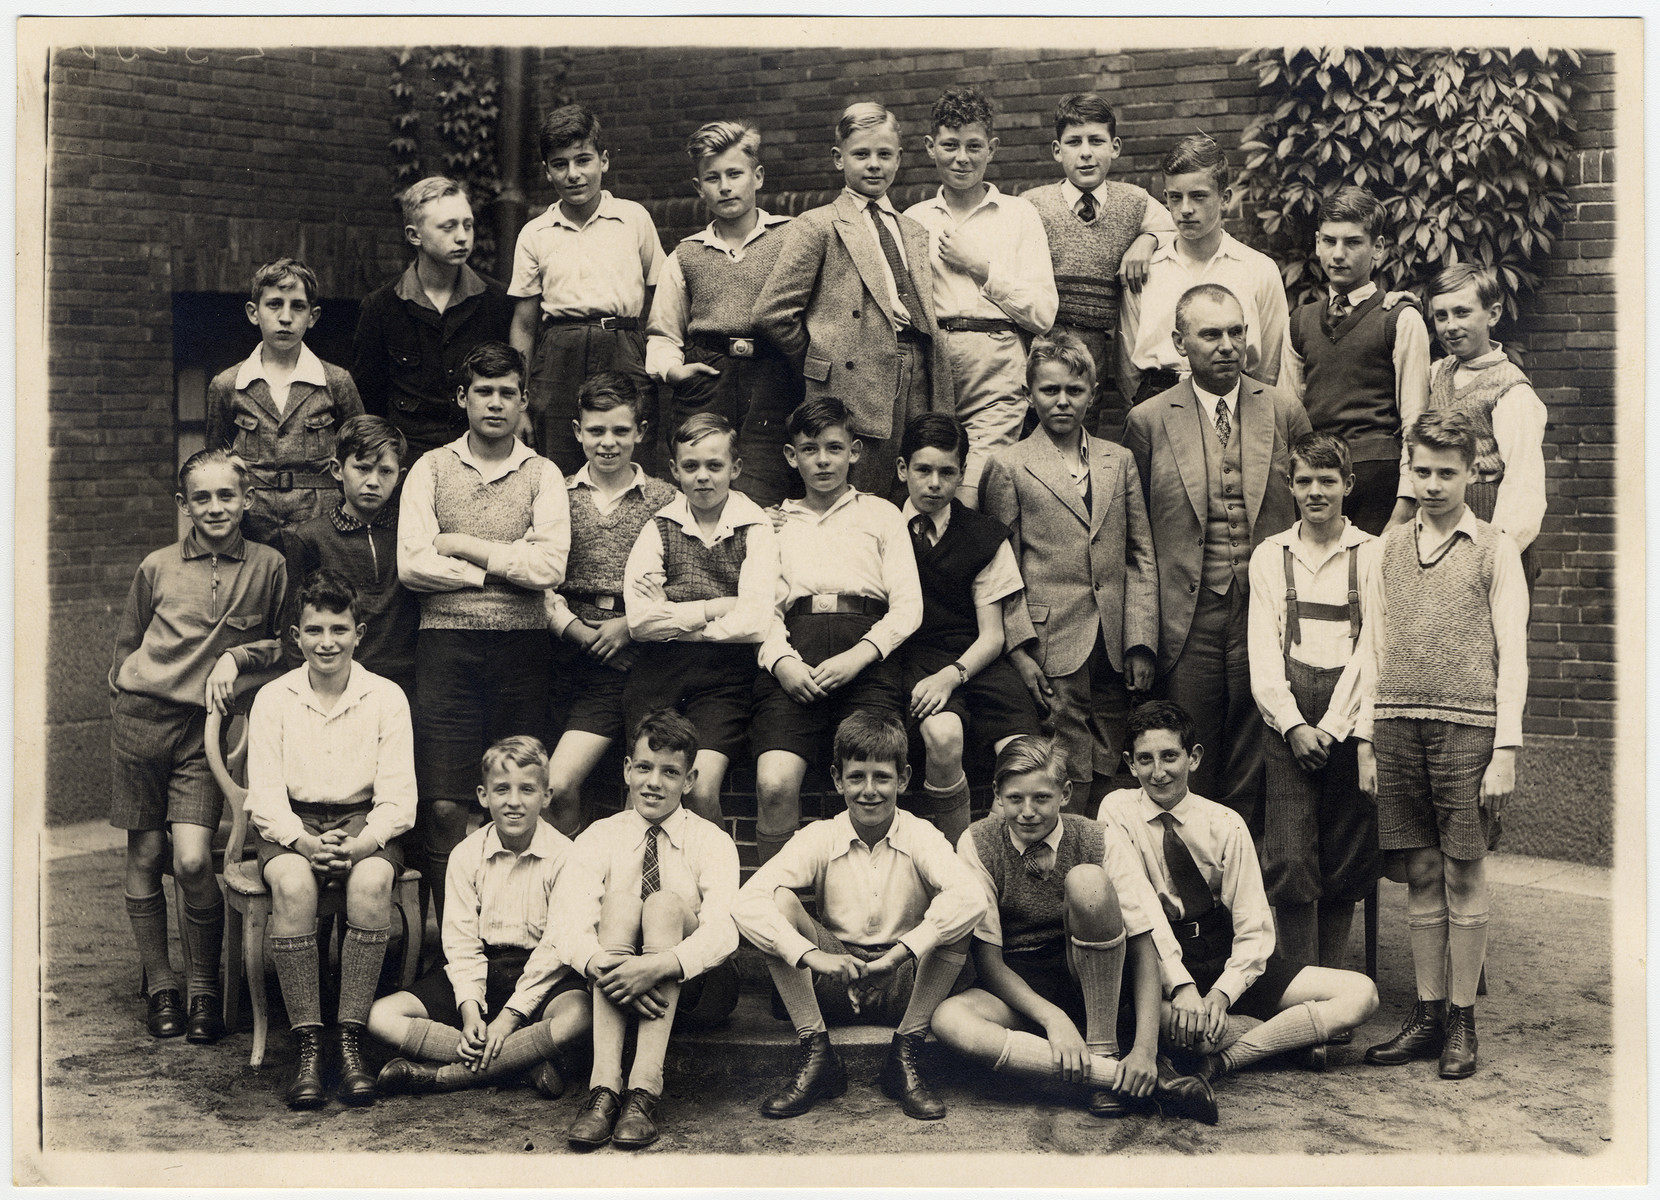 Portrait of a boy's class in Hamburg, Germany with both German and Jewish students.

Among those pictured is Werner John Bing.